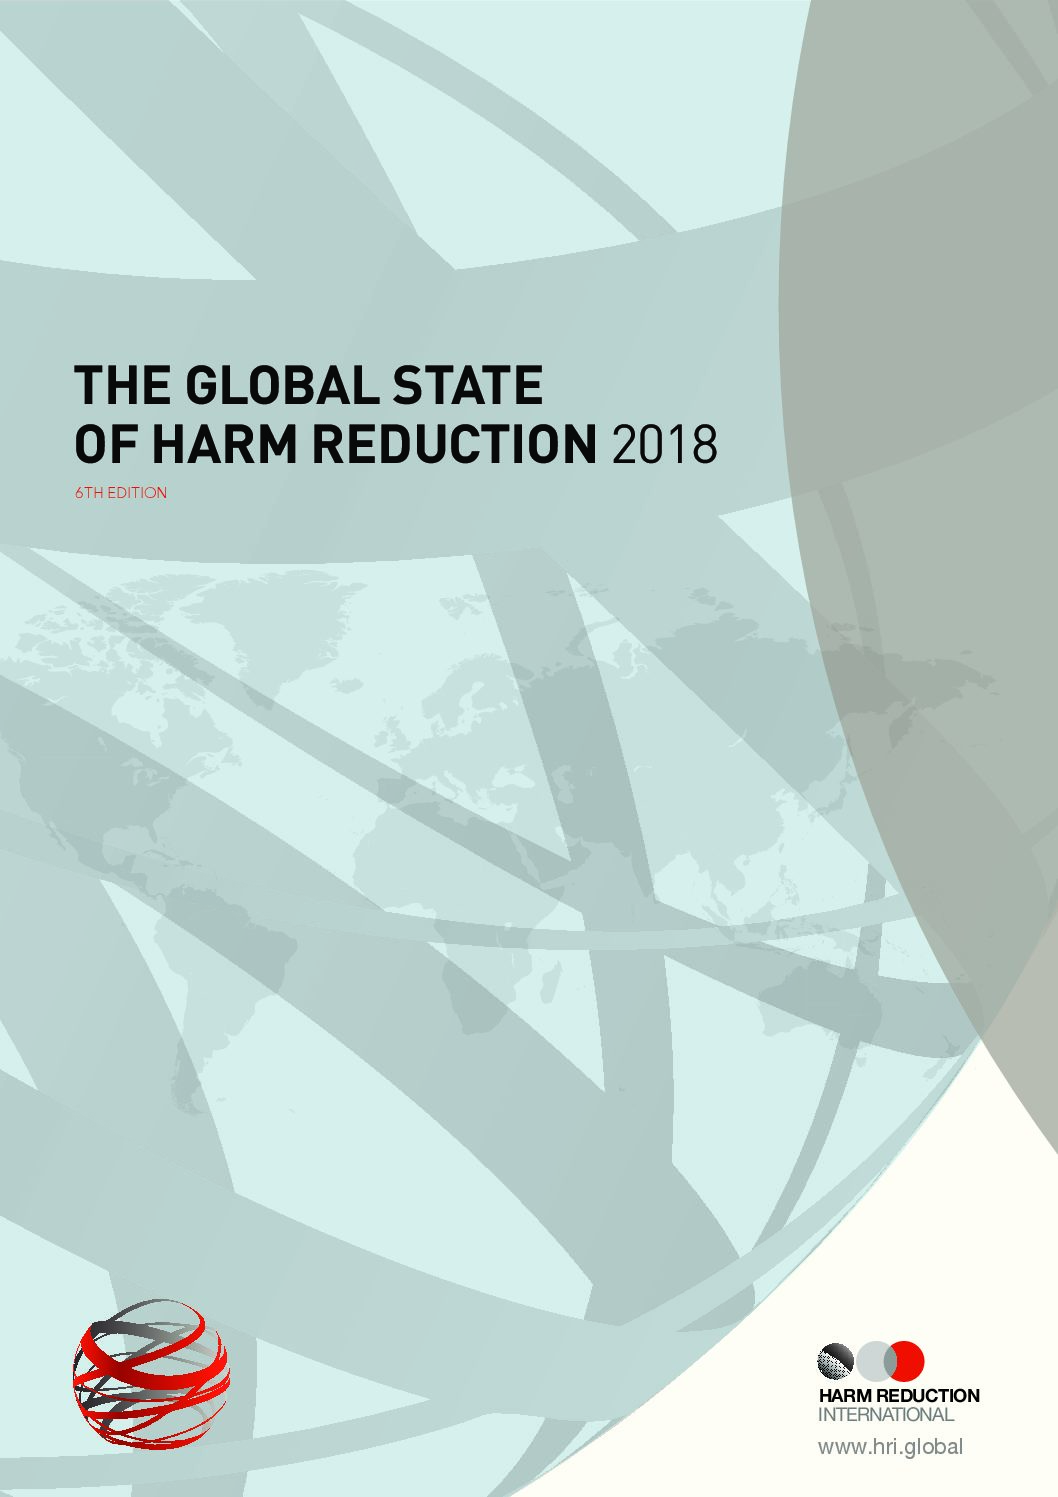 The Global State of Harm Reduction 2018